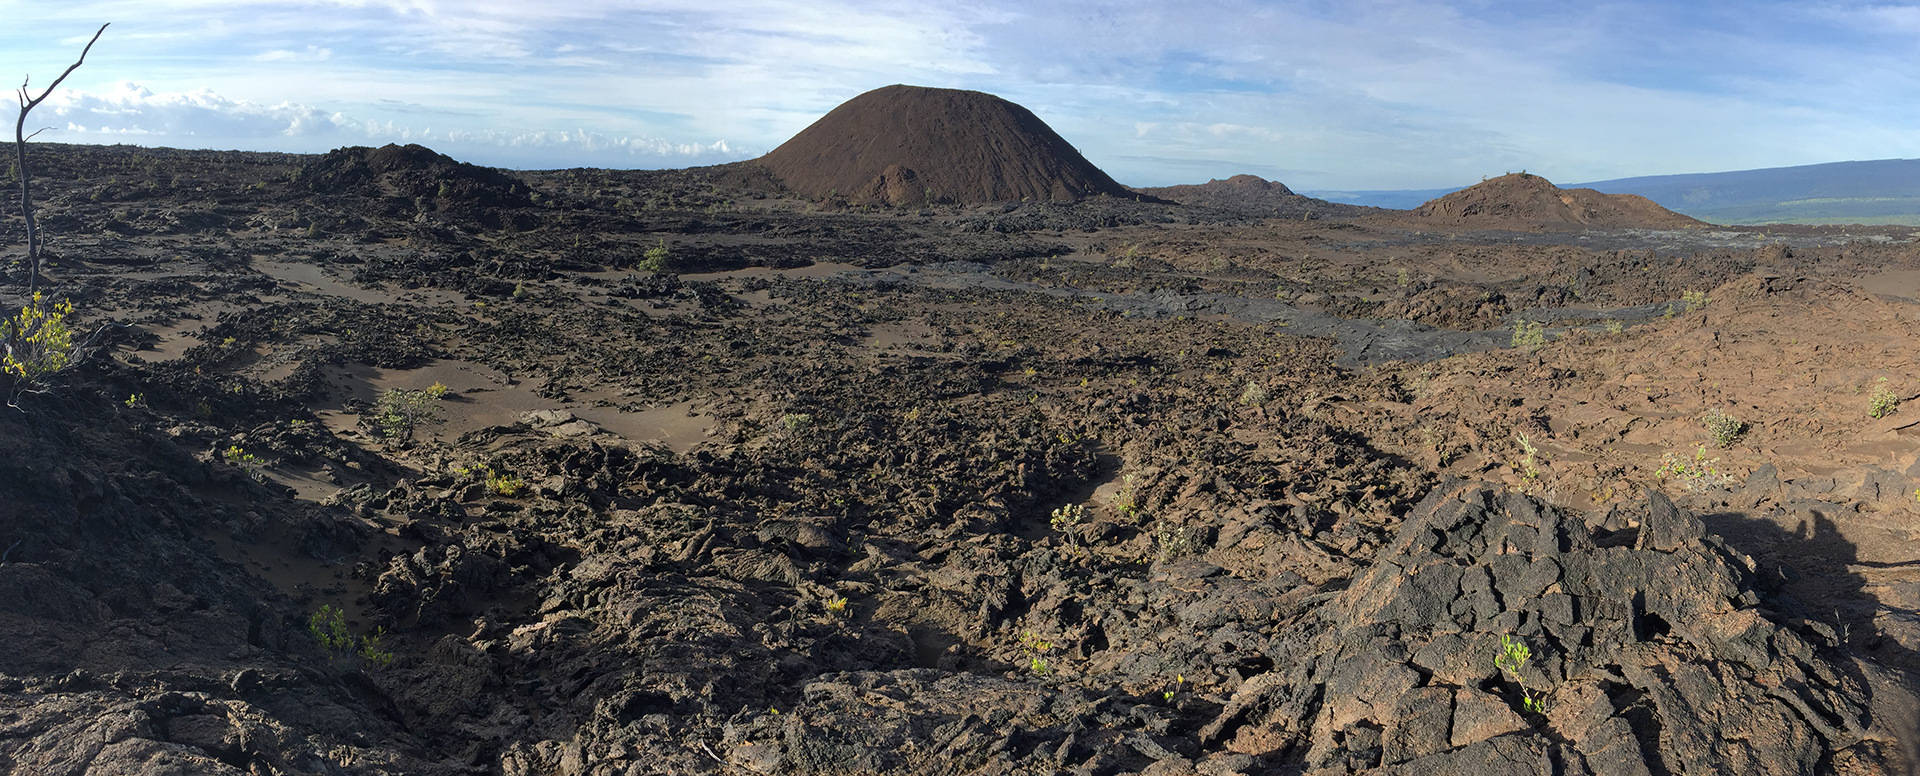 Shown here are three of the main volcanic cones (center and right) that make up the Kamakaiʻa Hills on Kīlauea Volcano’s Southwest Rift Zone. Findings from a study of the Kamakaiʻa Hills that is currently underway by the USGS Hawaiian Volcano Observatory will likely revise the known geologic history of this remote area on Kīlauea and provide new insights on past and future eruptions along the volcano's Southwest Rift Zone. USGS photo.